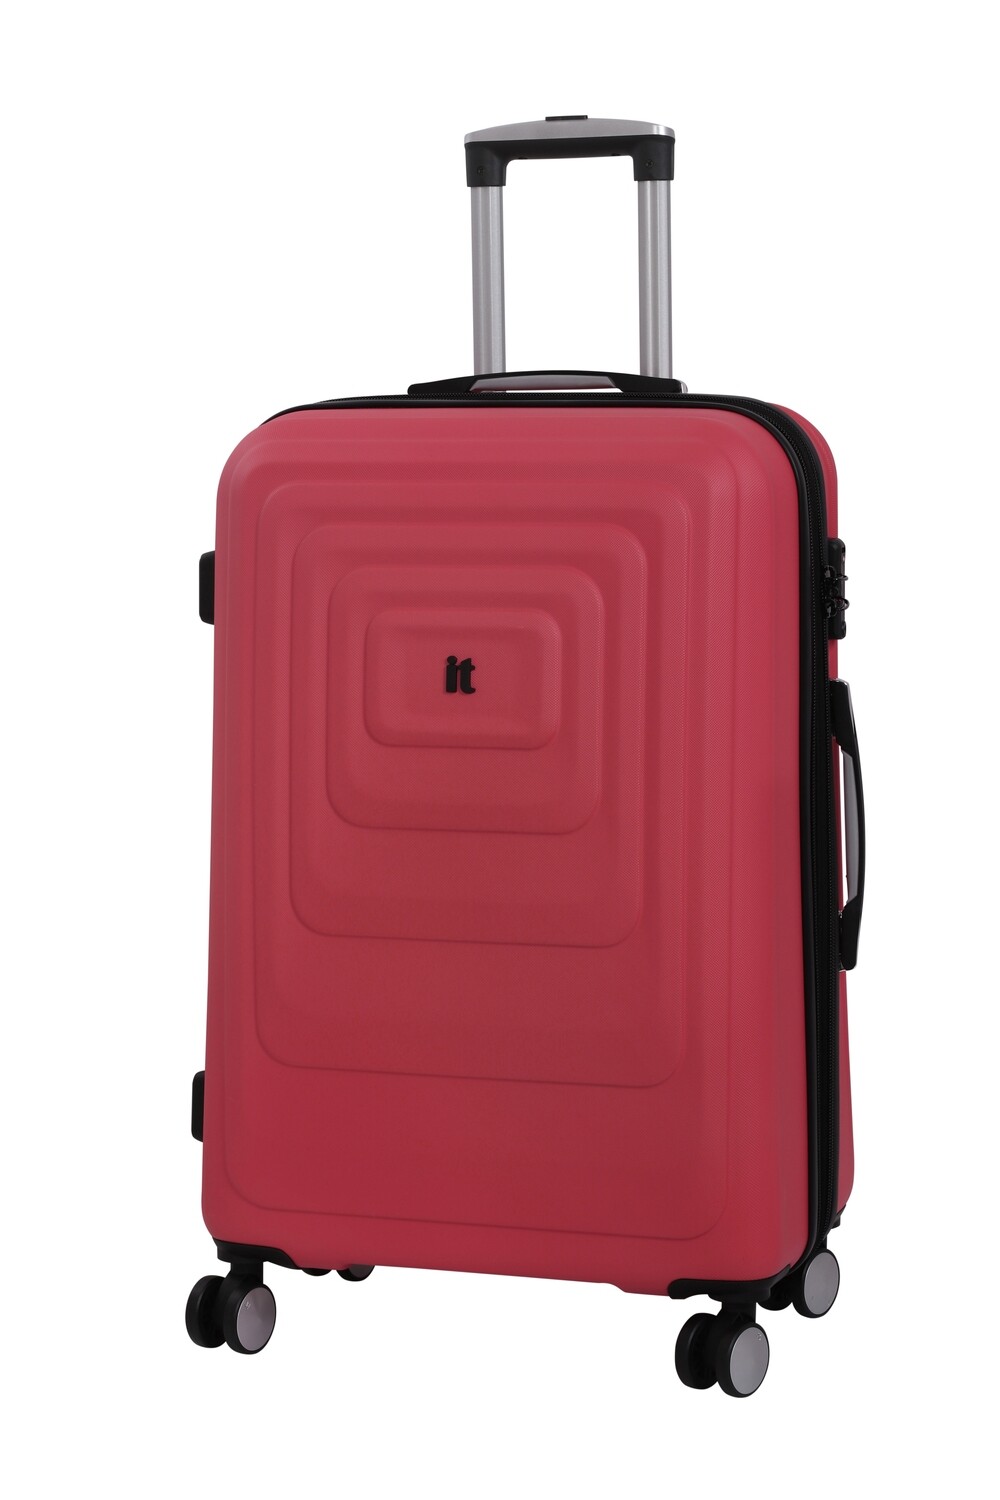 IT LUGGAGE MESMERIZE 26" STRONG TROLLEY CAYENNE